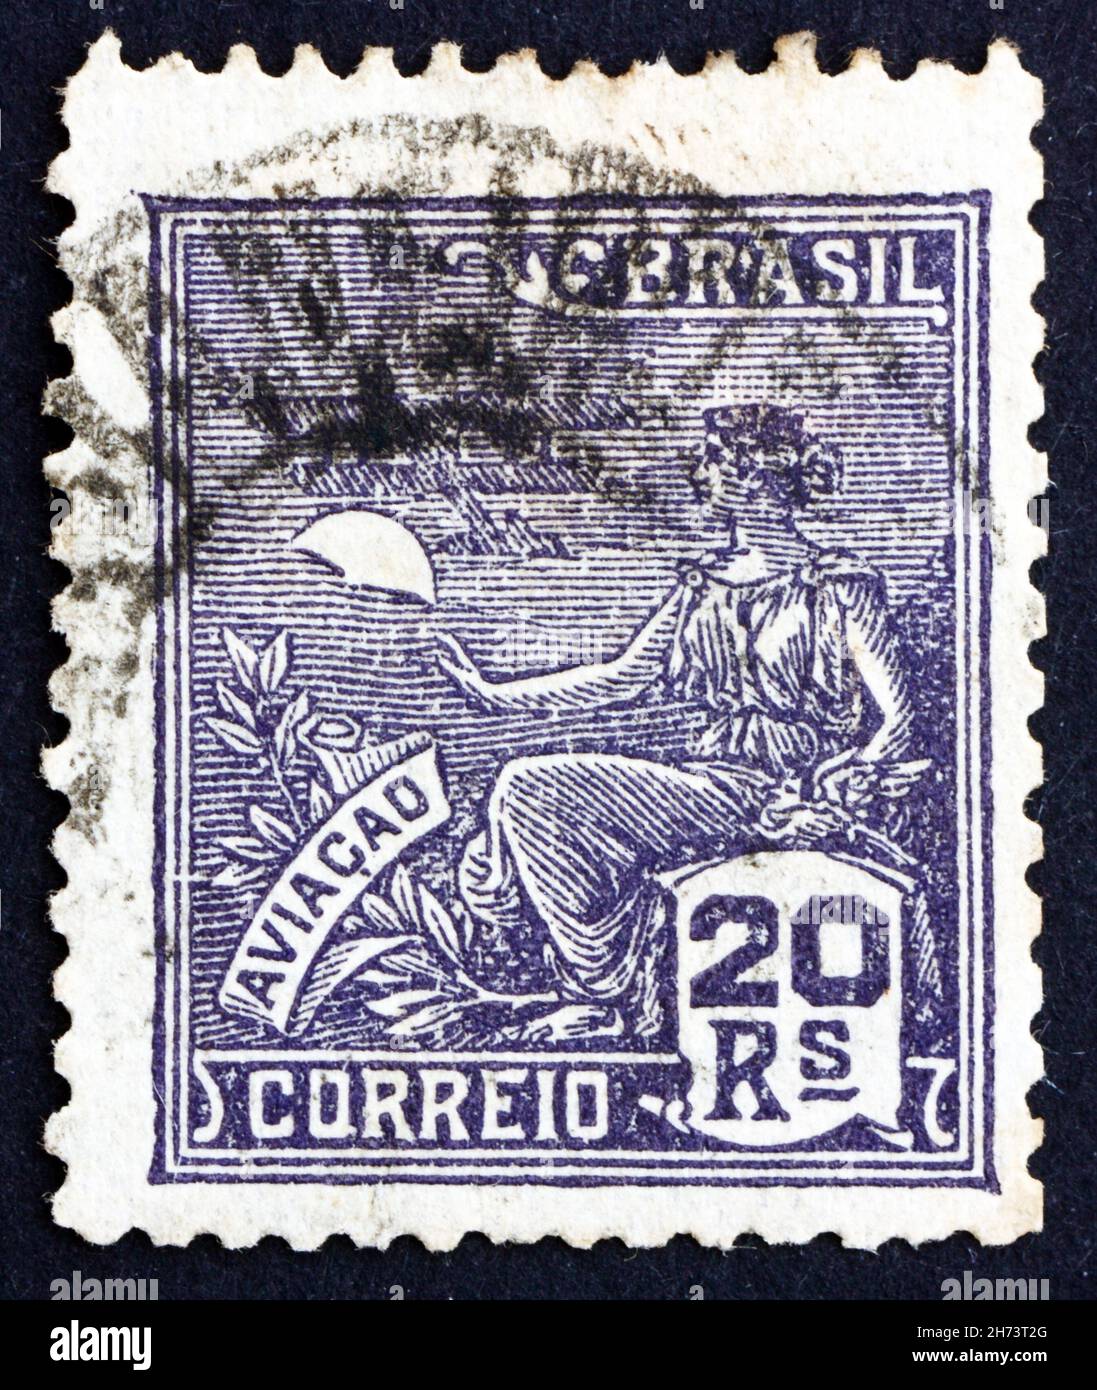 Brazil Early 1900's Set Of 5 Stamps